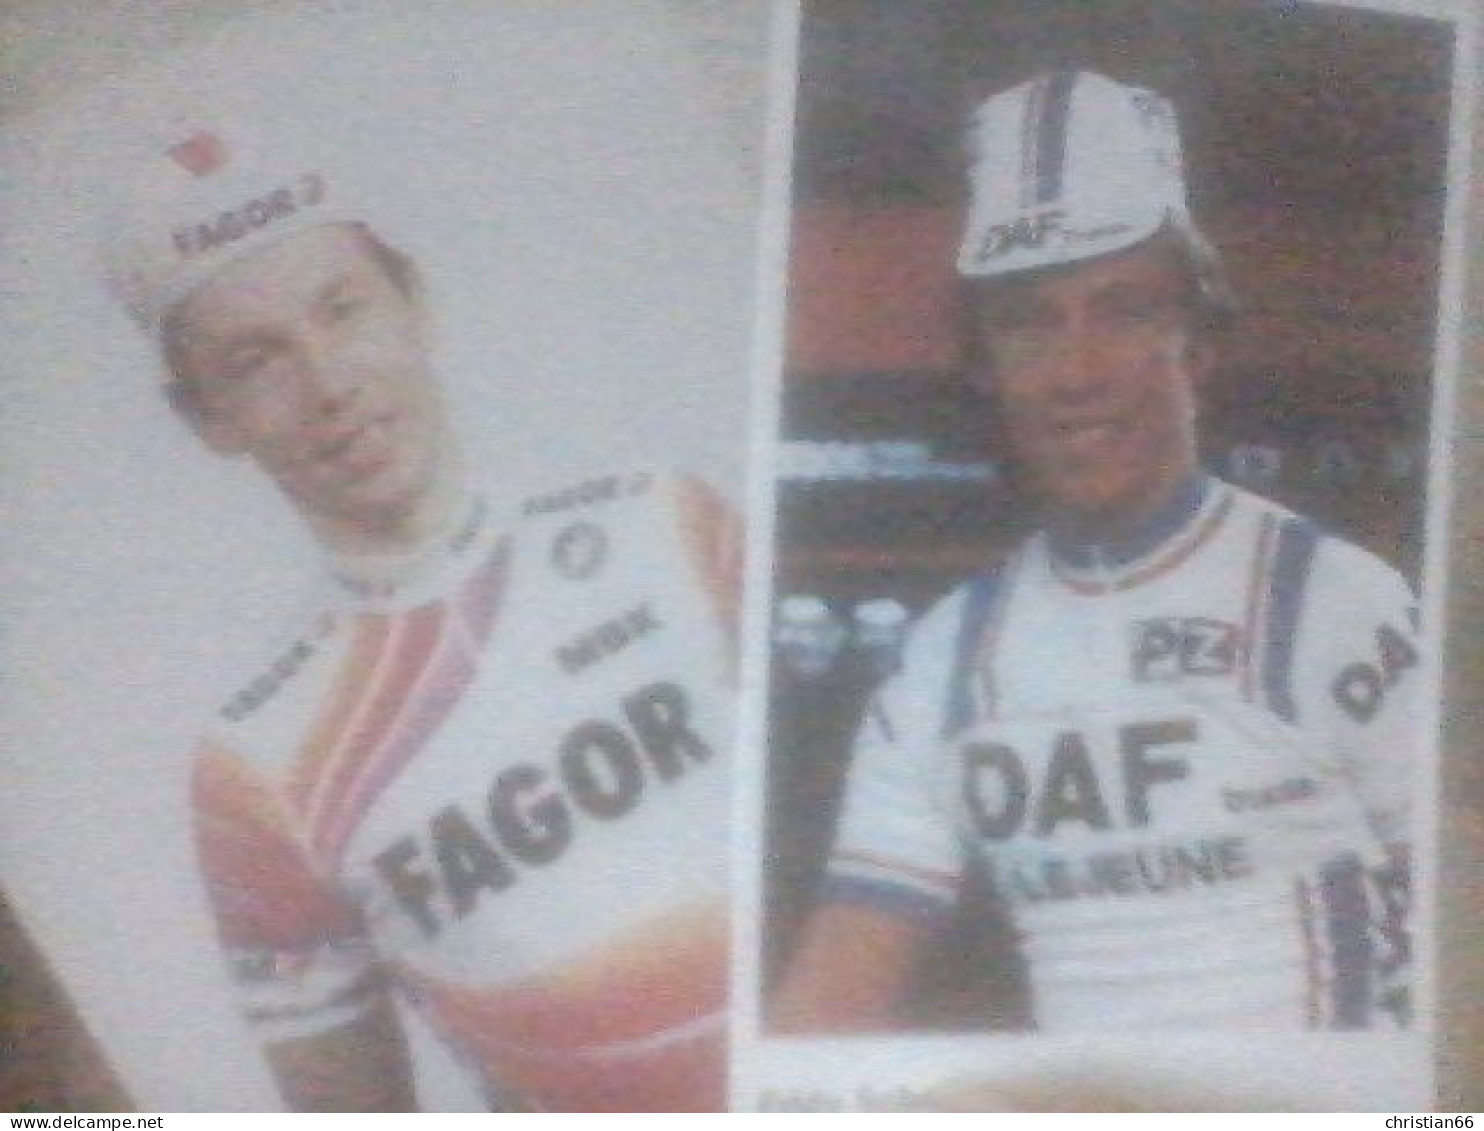 CYCLISME  - WIELRENNEN- CICLISMO : 2 CARTES EDDY SCHEPERS - Cycling